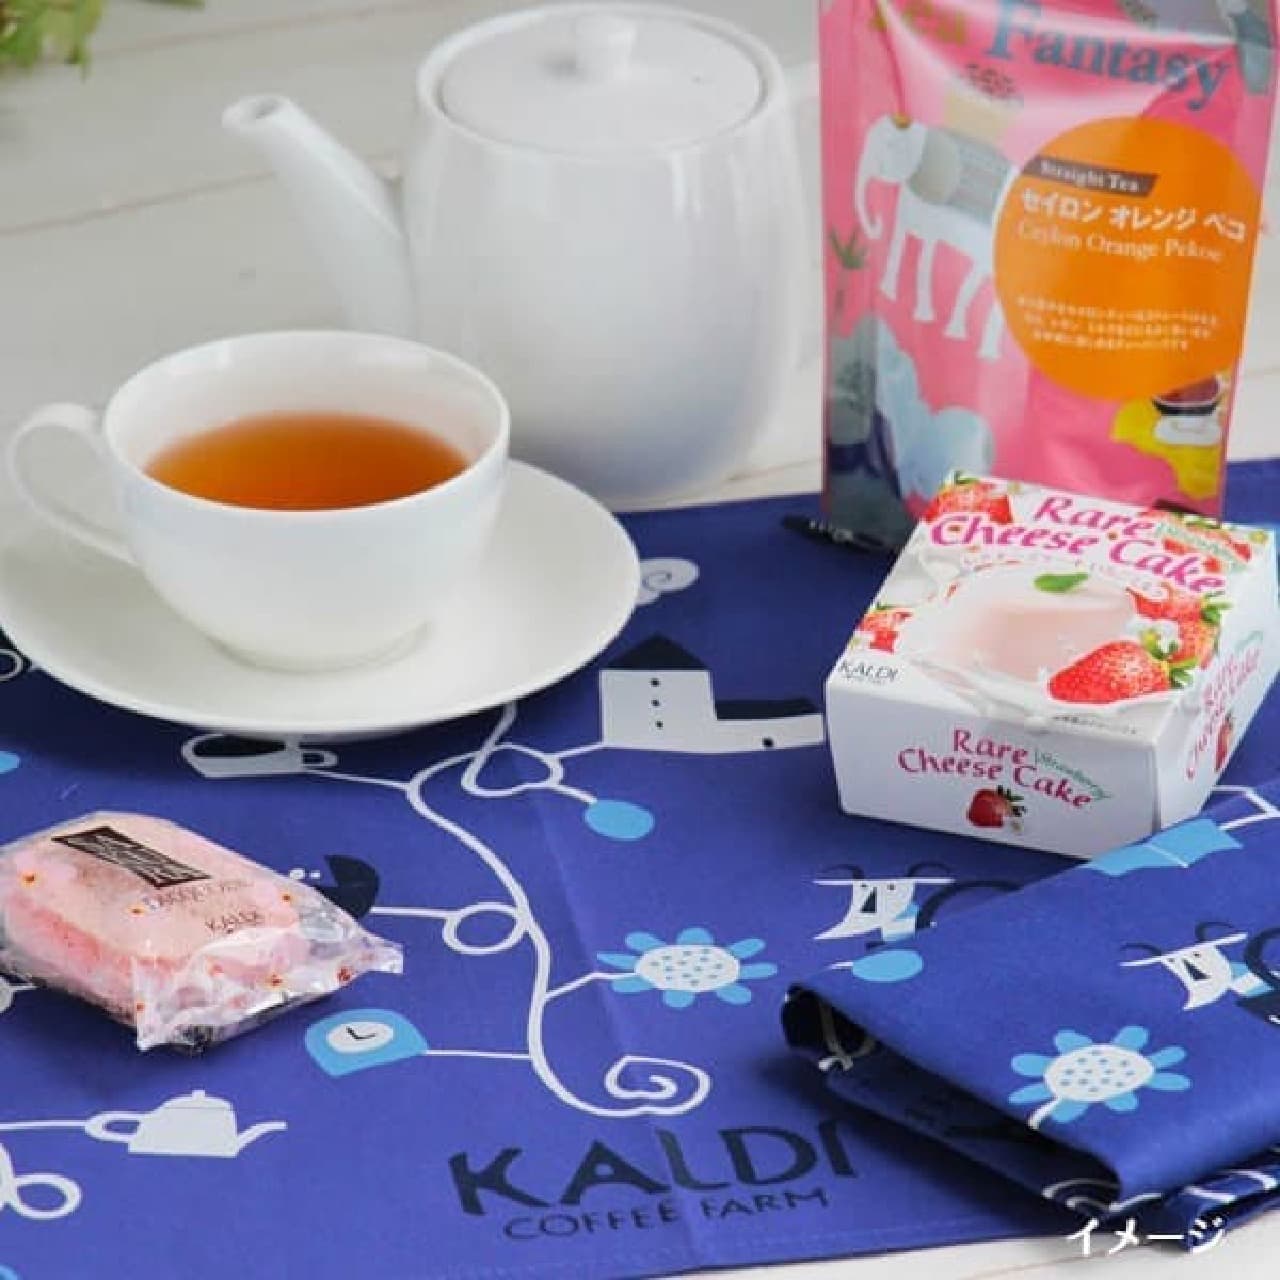 Limited quantity "tea time set with place mat" for KALDI